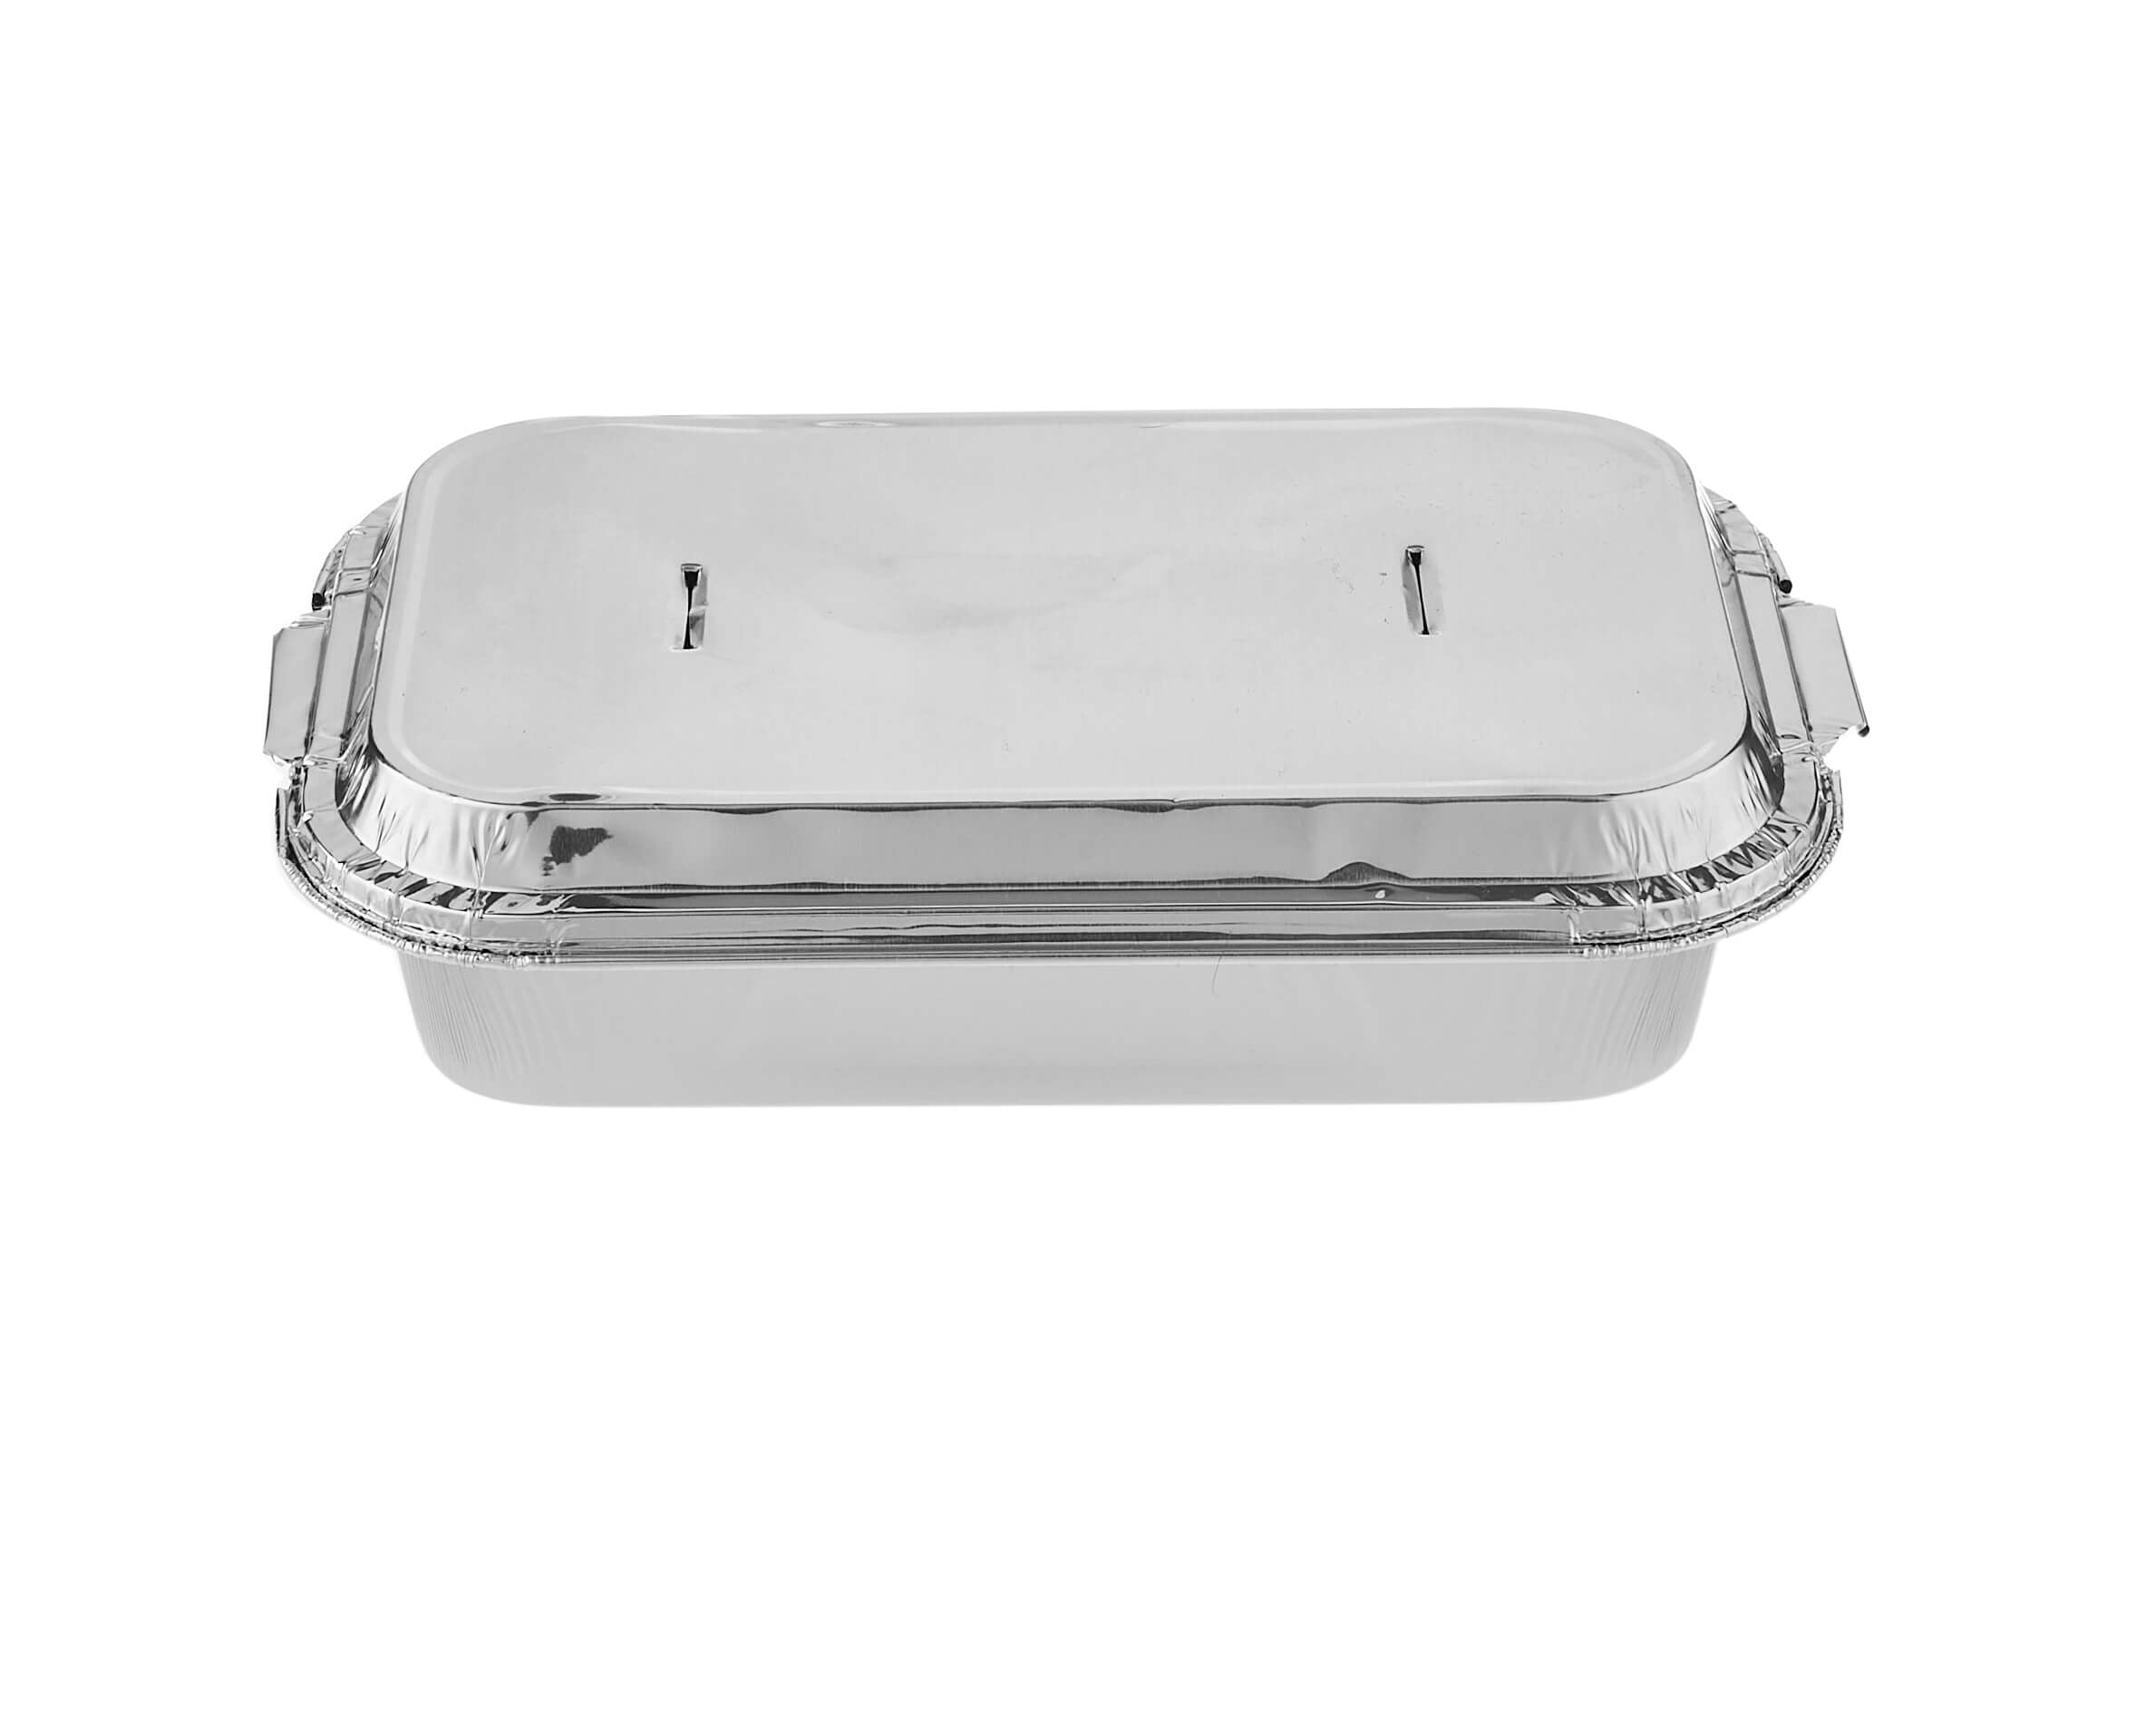 Airline Aluminium Container with Lid - Hotpack Global